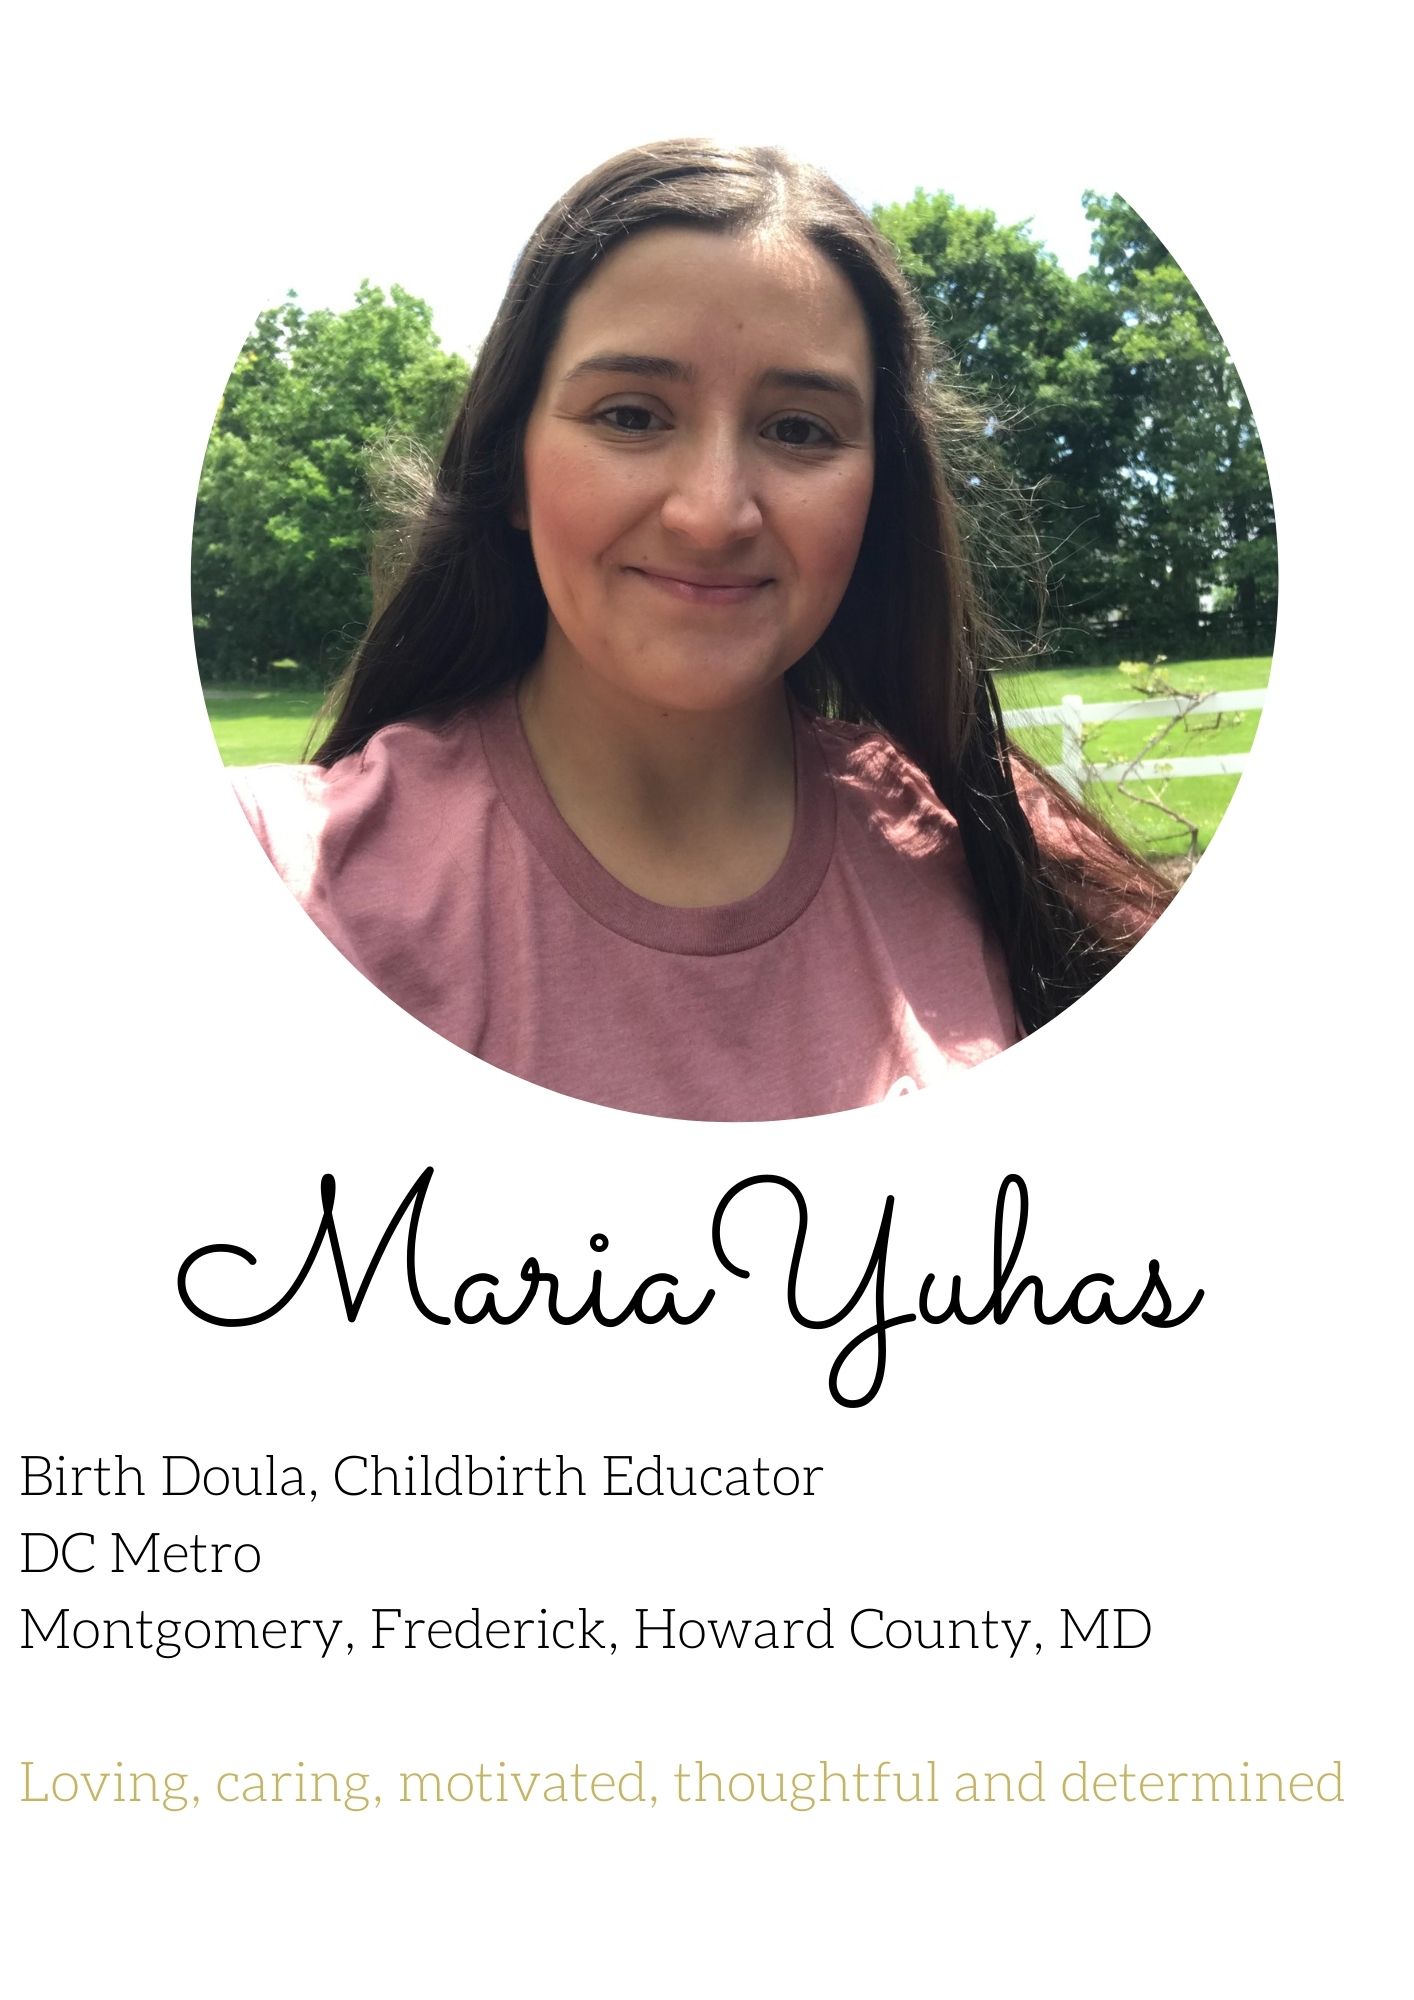 Maria Yuhas Birth Doula Childbirth Educator DC Metro Montgomery, Frederick, Howard County MD loving caring motivated thoughtful and determined